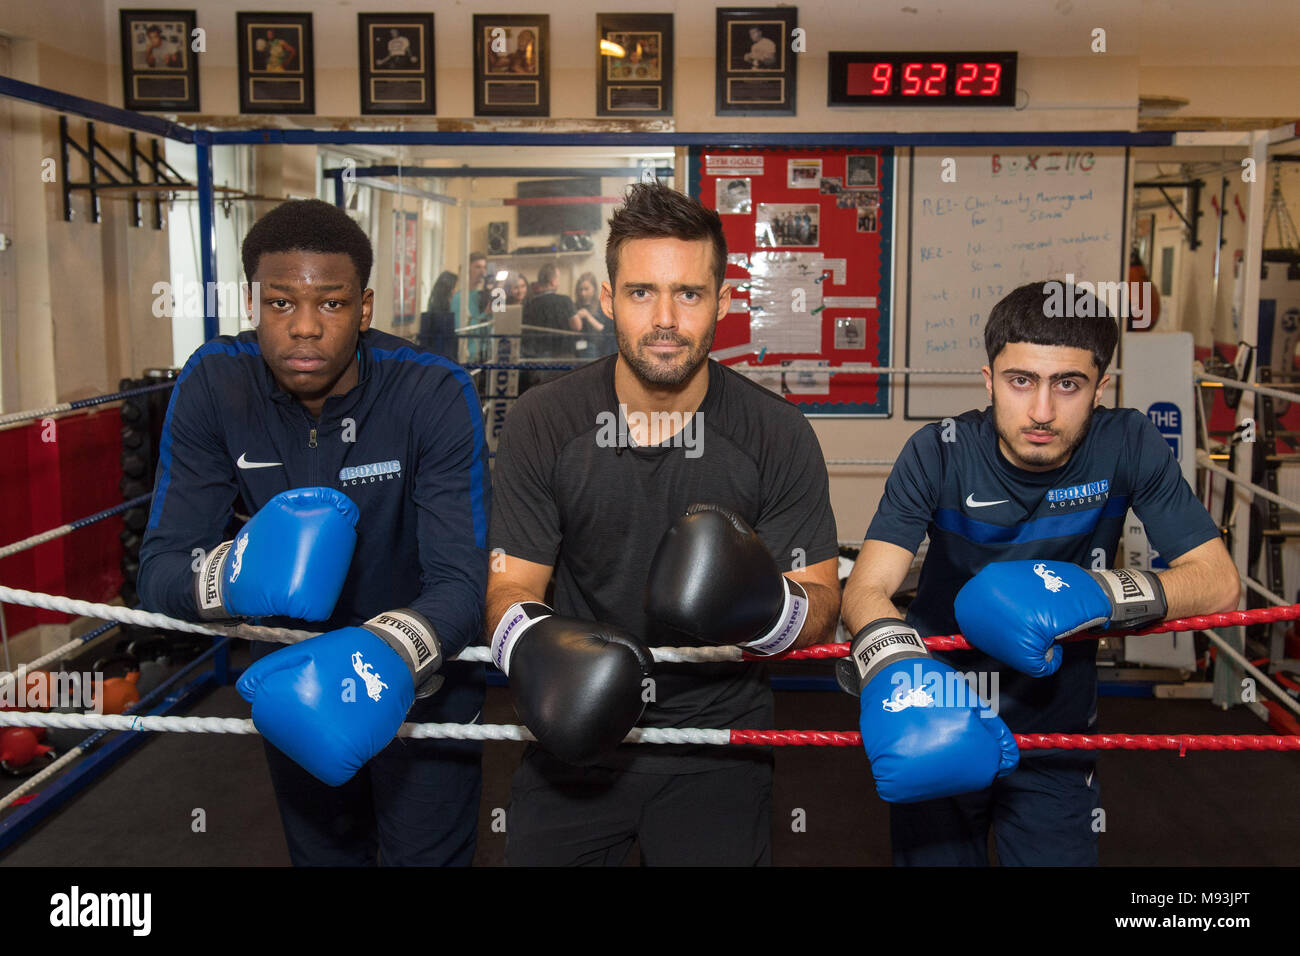 Spencer Matthews (centre) with students Tipoti (left) and Ali (no surnames given) during a visit to the Boxing Academy, a Comic Relief funded sport project in Hackney, London, ahead of Sport Relief boxing challenge. 13/03/18 Stock Photo